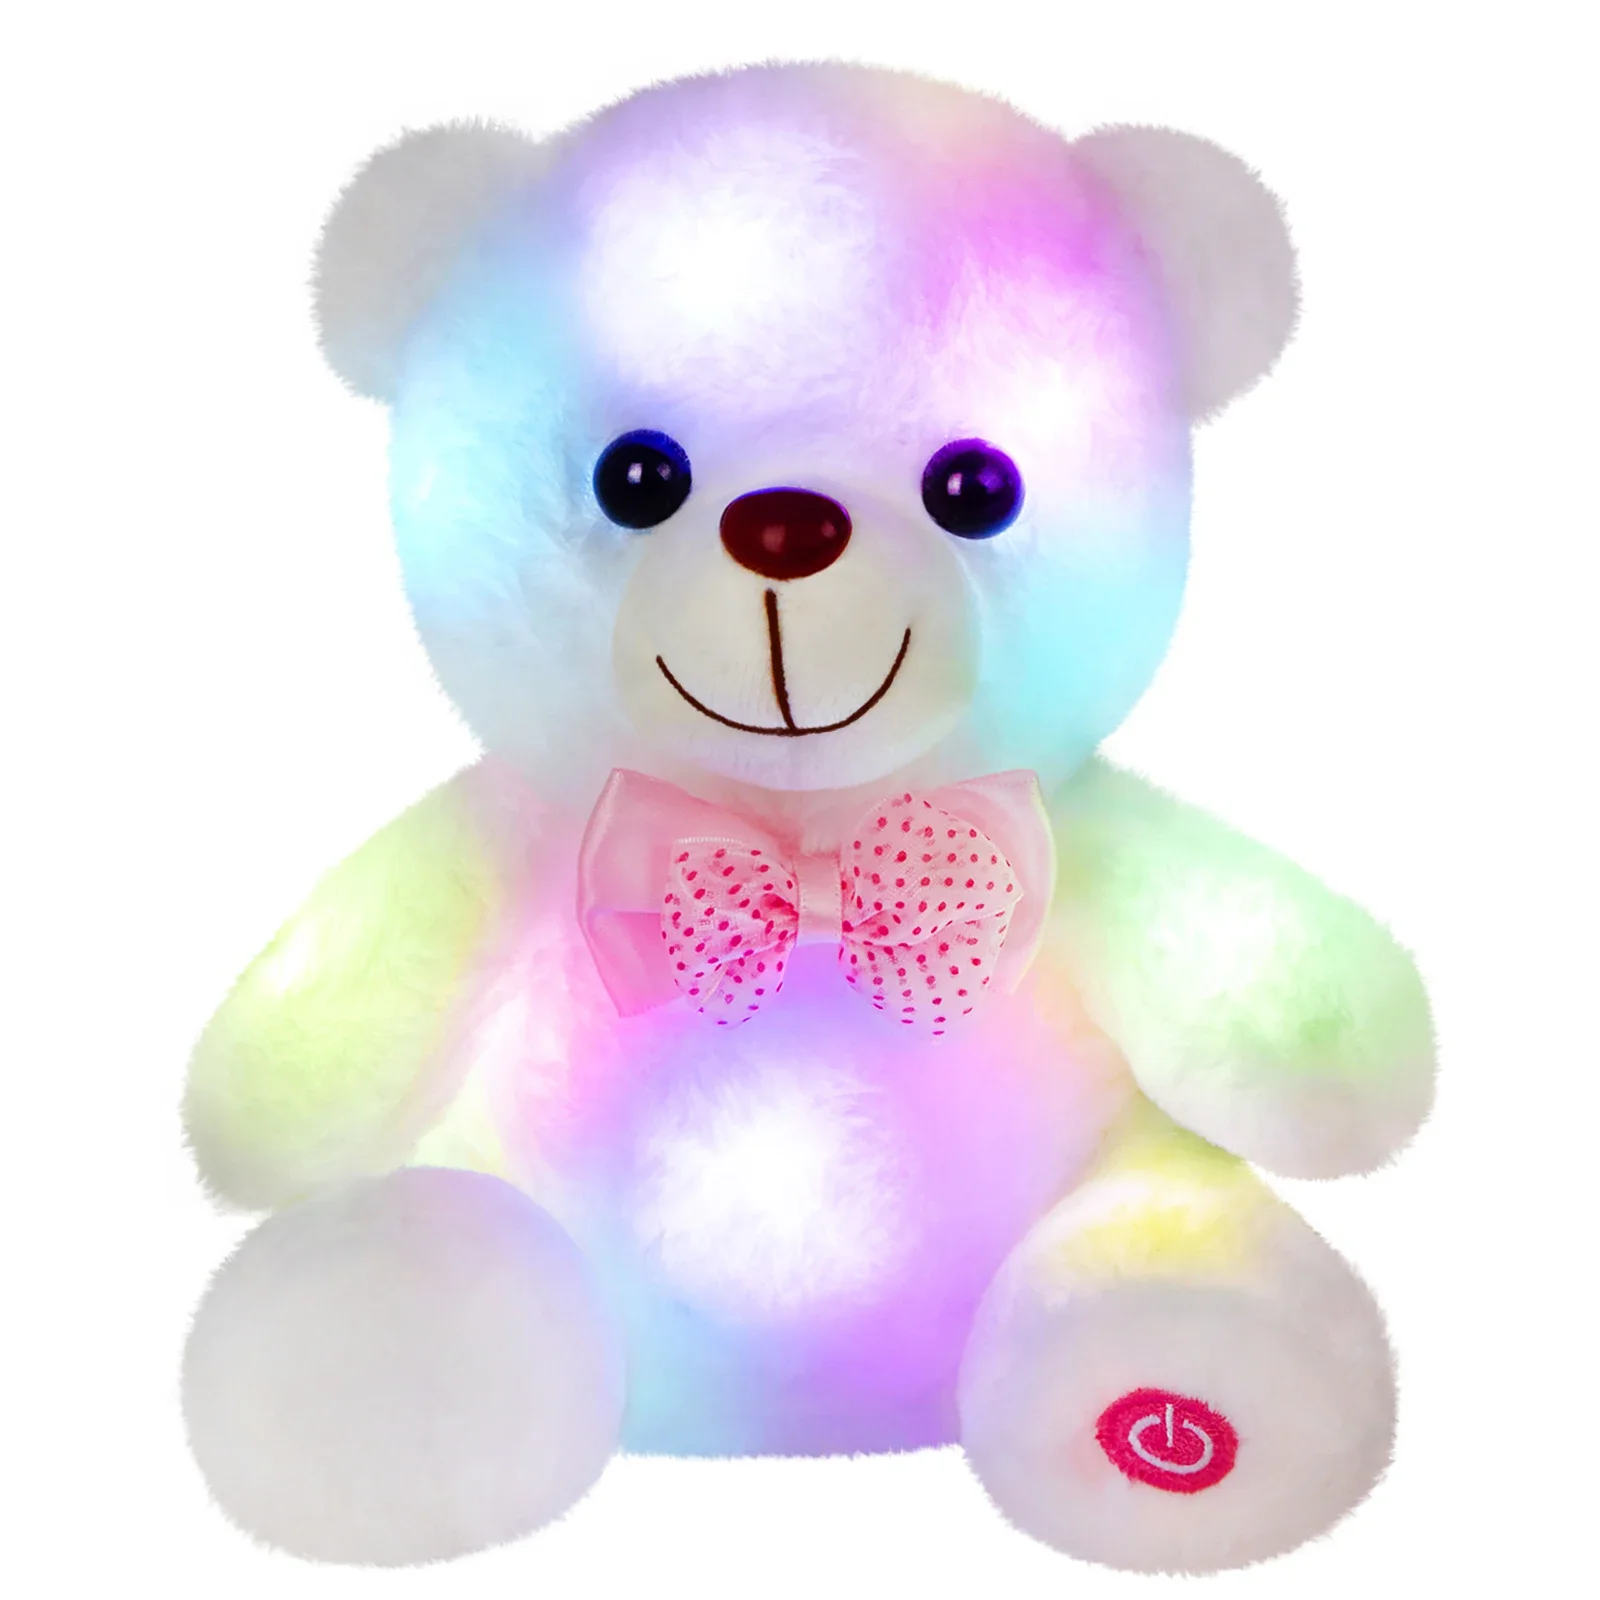 White Bear LED Light Plush Animals Easy to Clean High Quality 20cm Kawaii Doll Stuffed Toys for Girls Bed Sleeping Throw Pillows brush clean tool fool style operation light weight repetitive using brushes cleaner cosy grip useful unique design comb cleaners